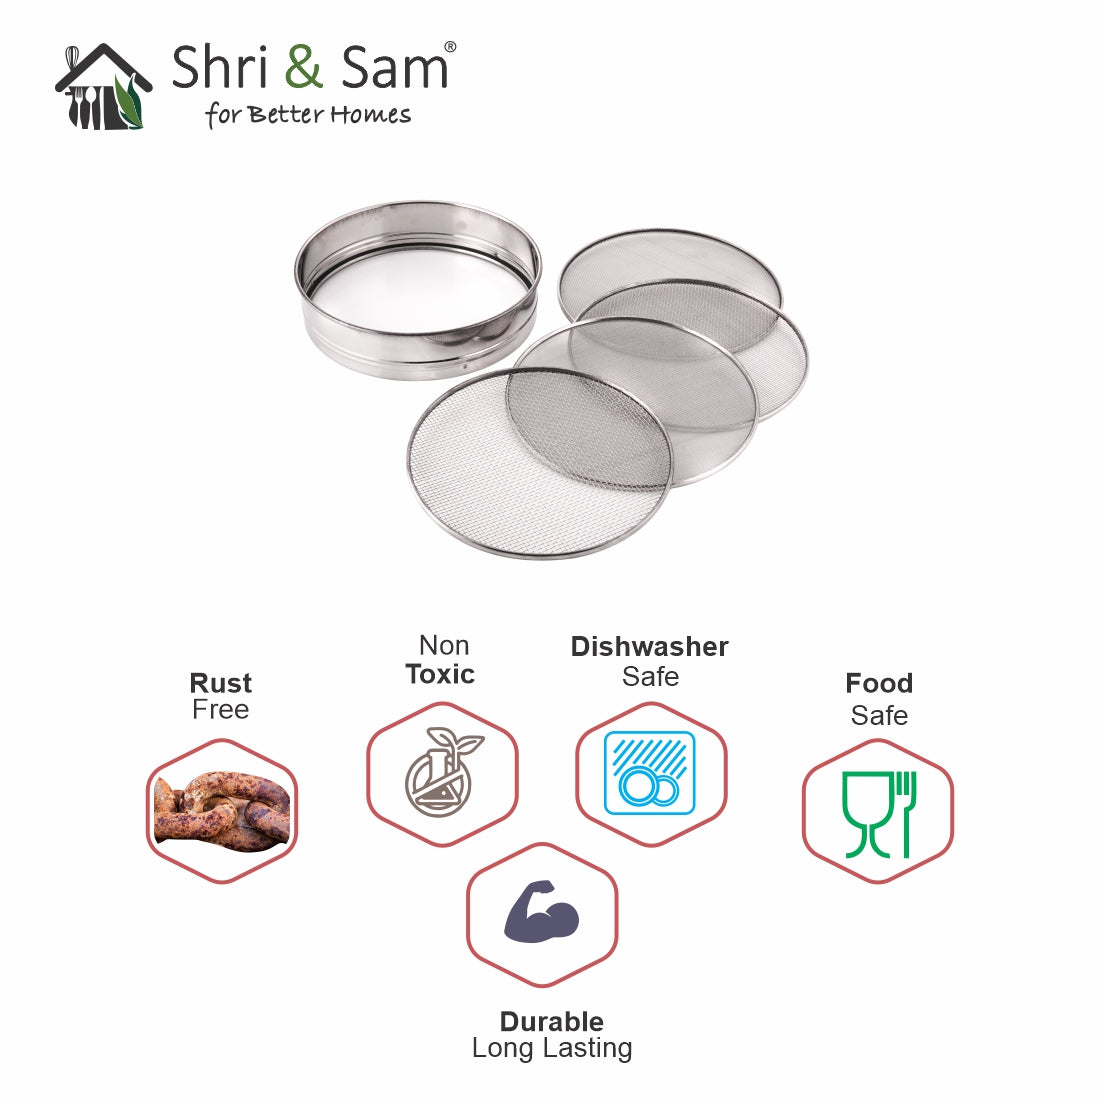 Stainless Steel Interchangeable Sieve Set with Holder